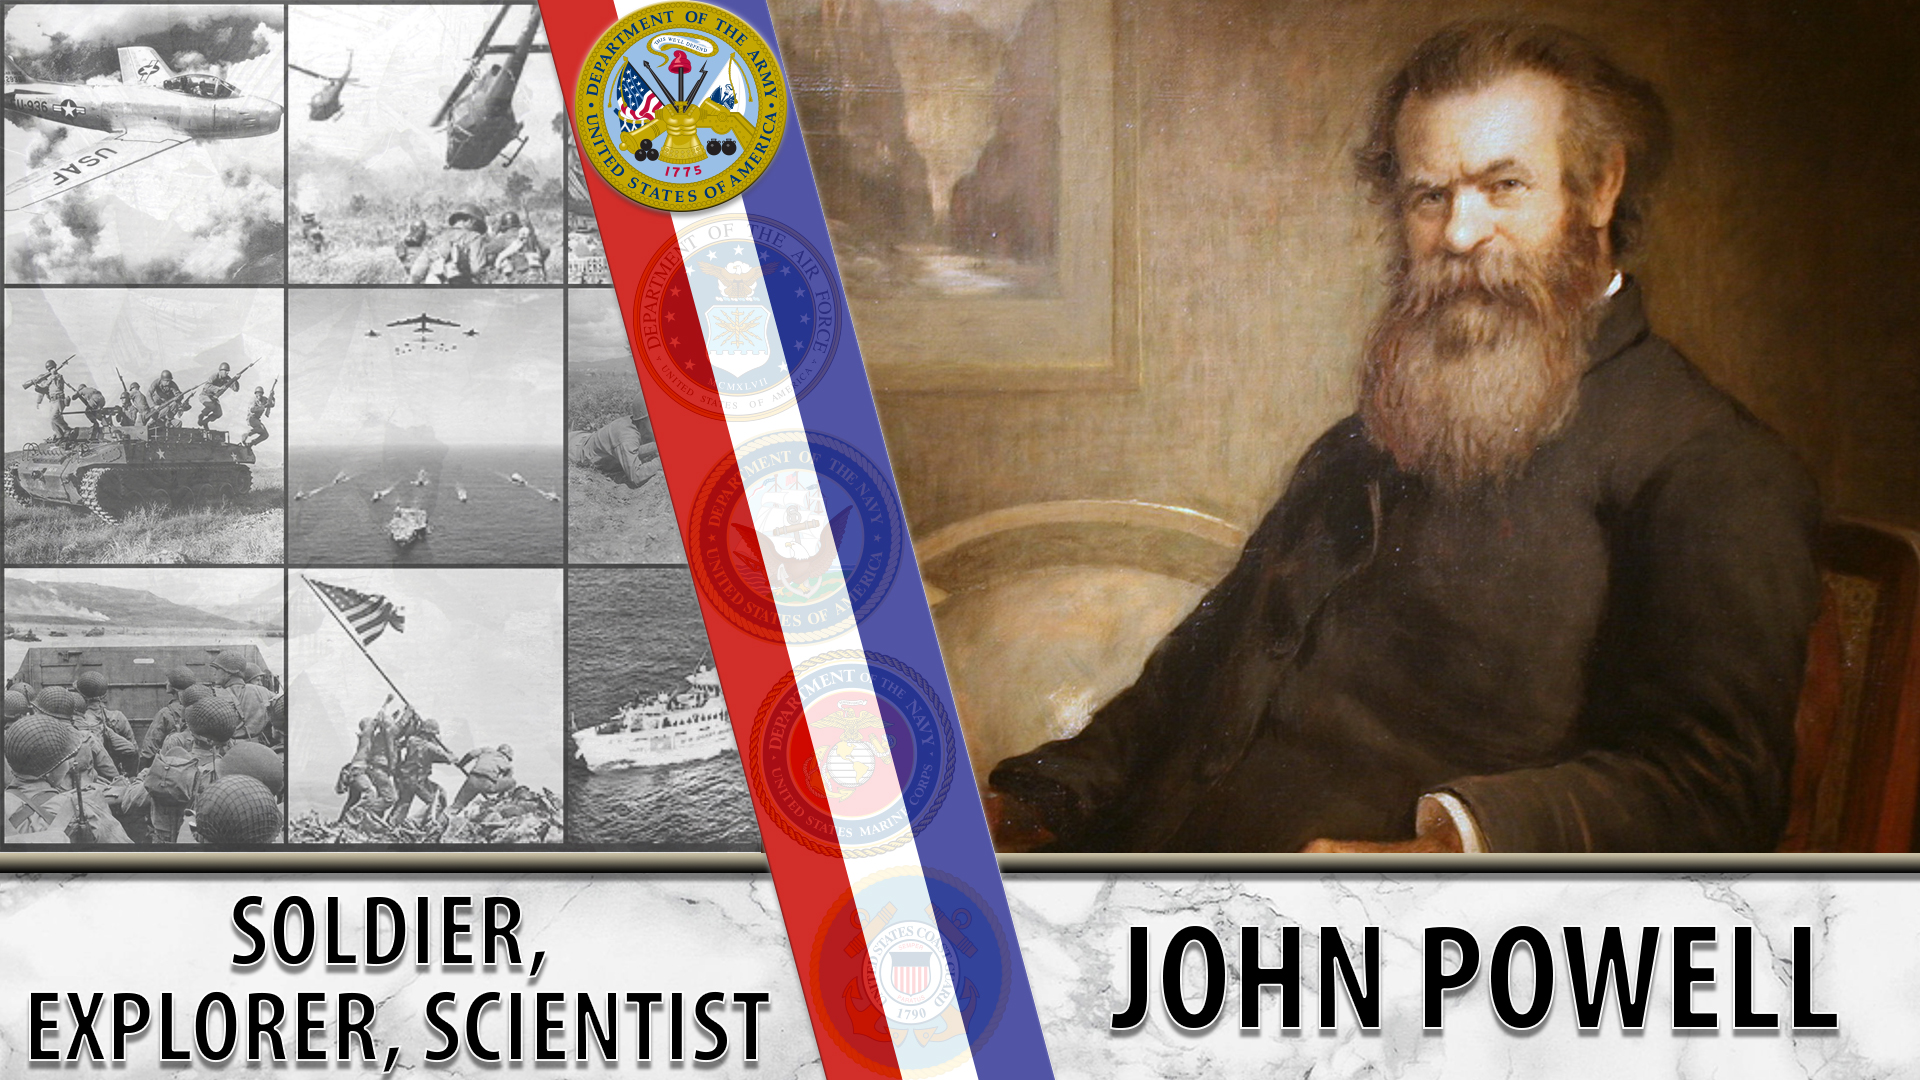 John Wesley Powell fought in the Civil War, and later explored the West.